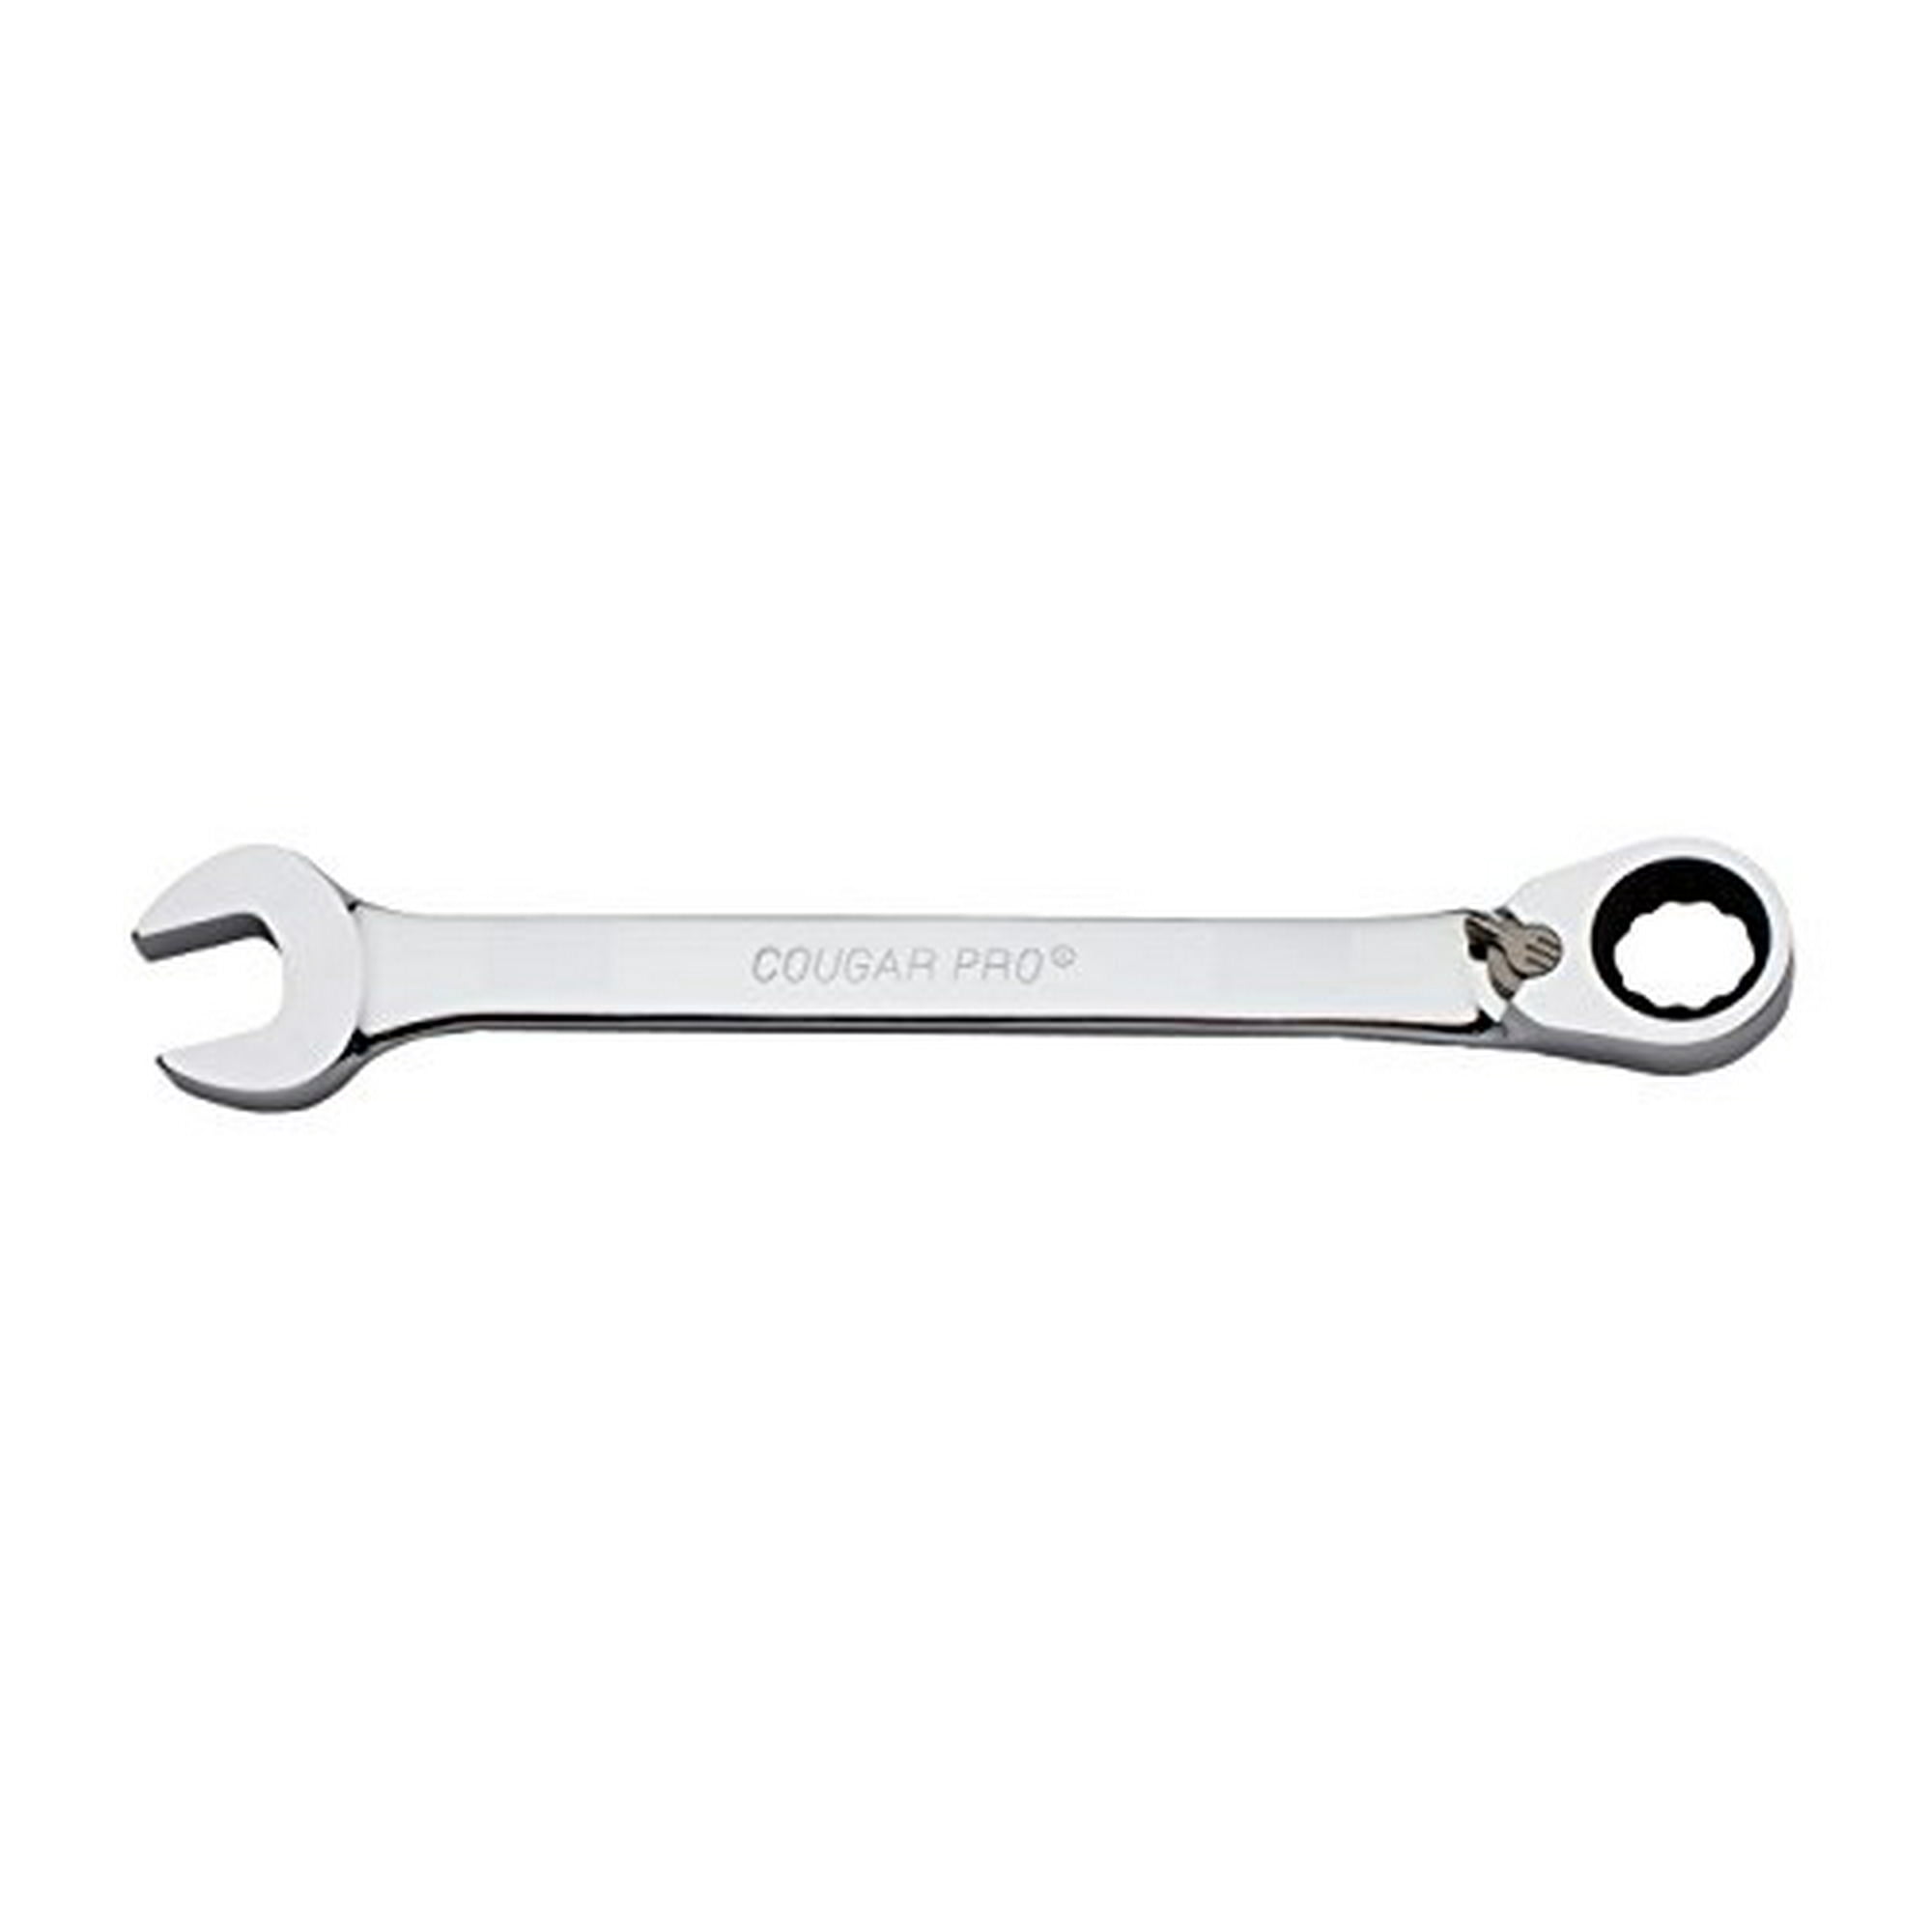 Cougar Pro by Wright Tool M1519 19mm Reversible Ratcheting Combination Wrench Full Polish Chrome 